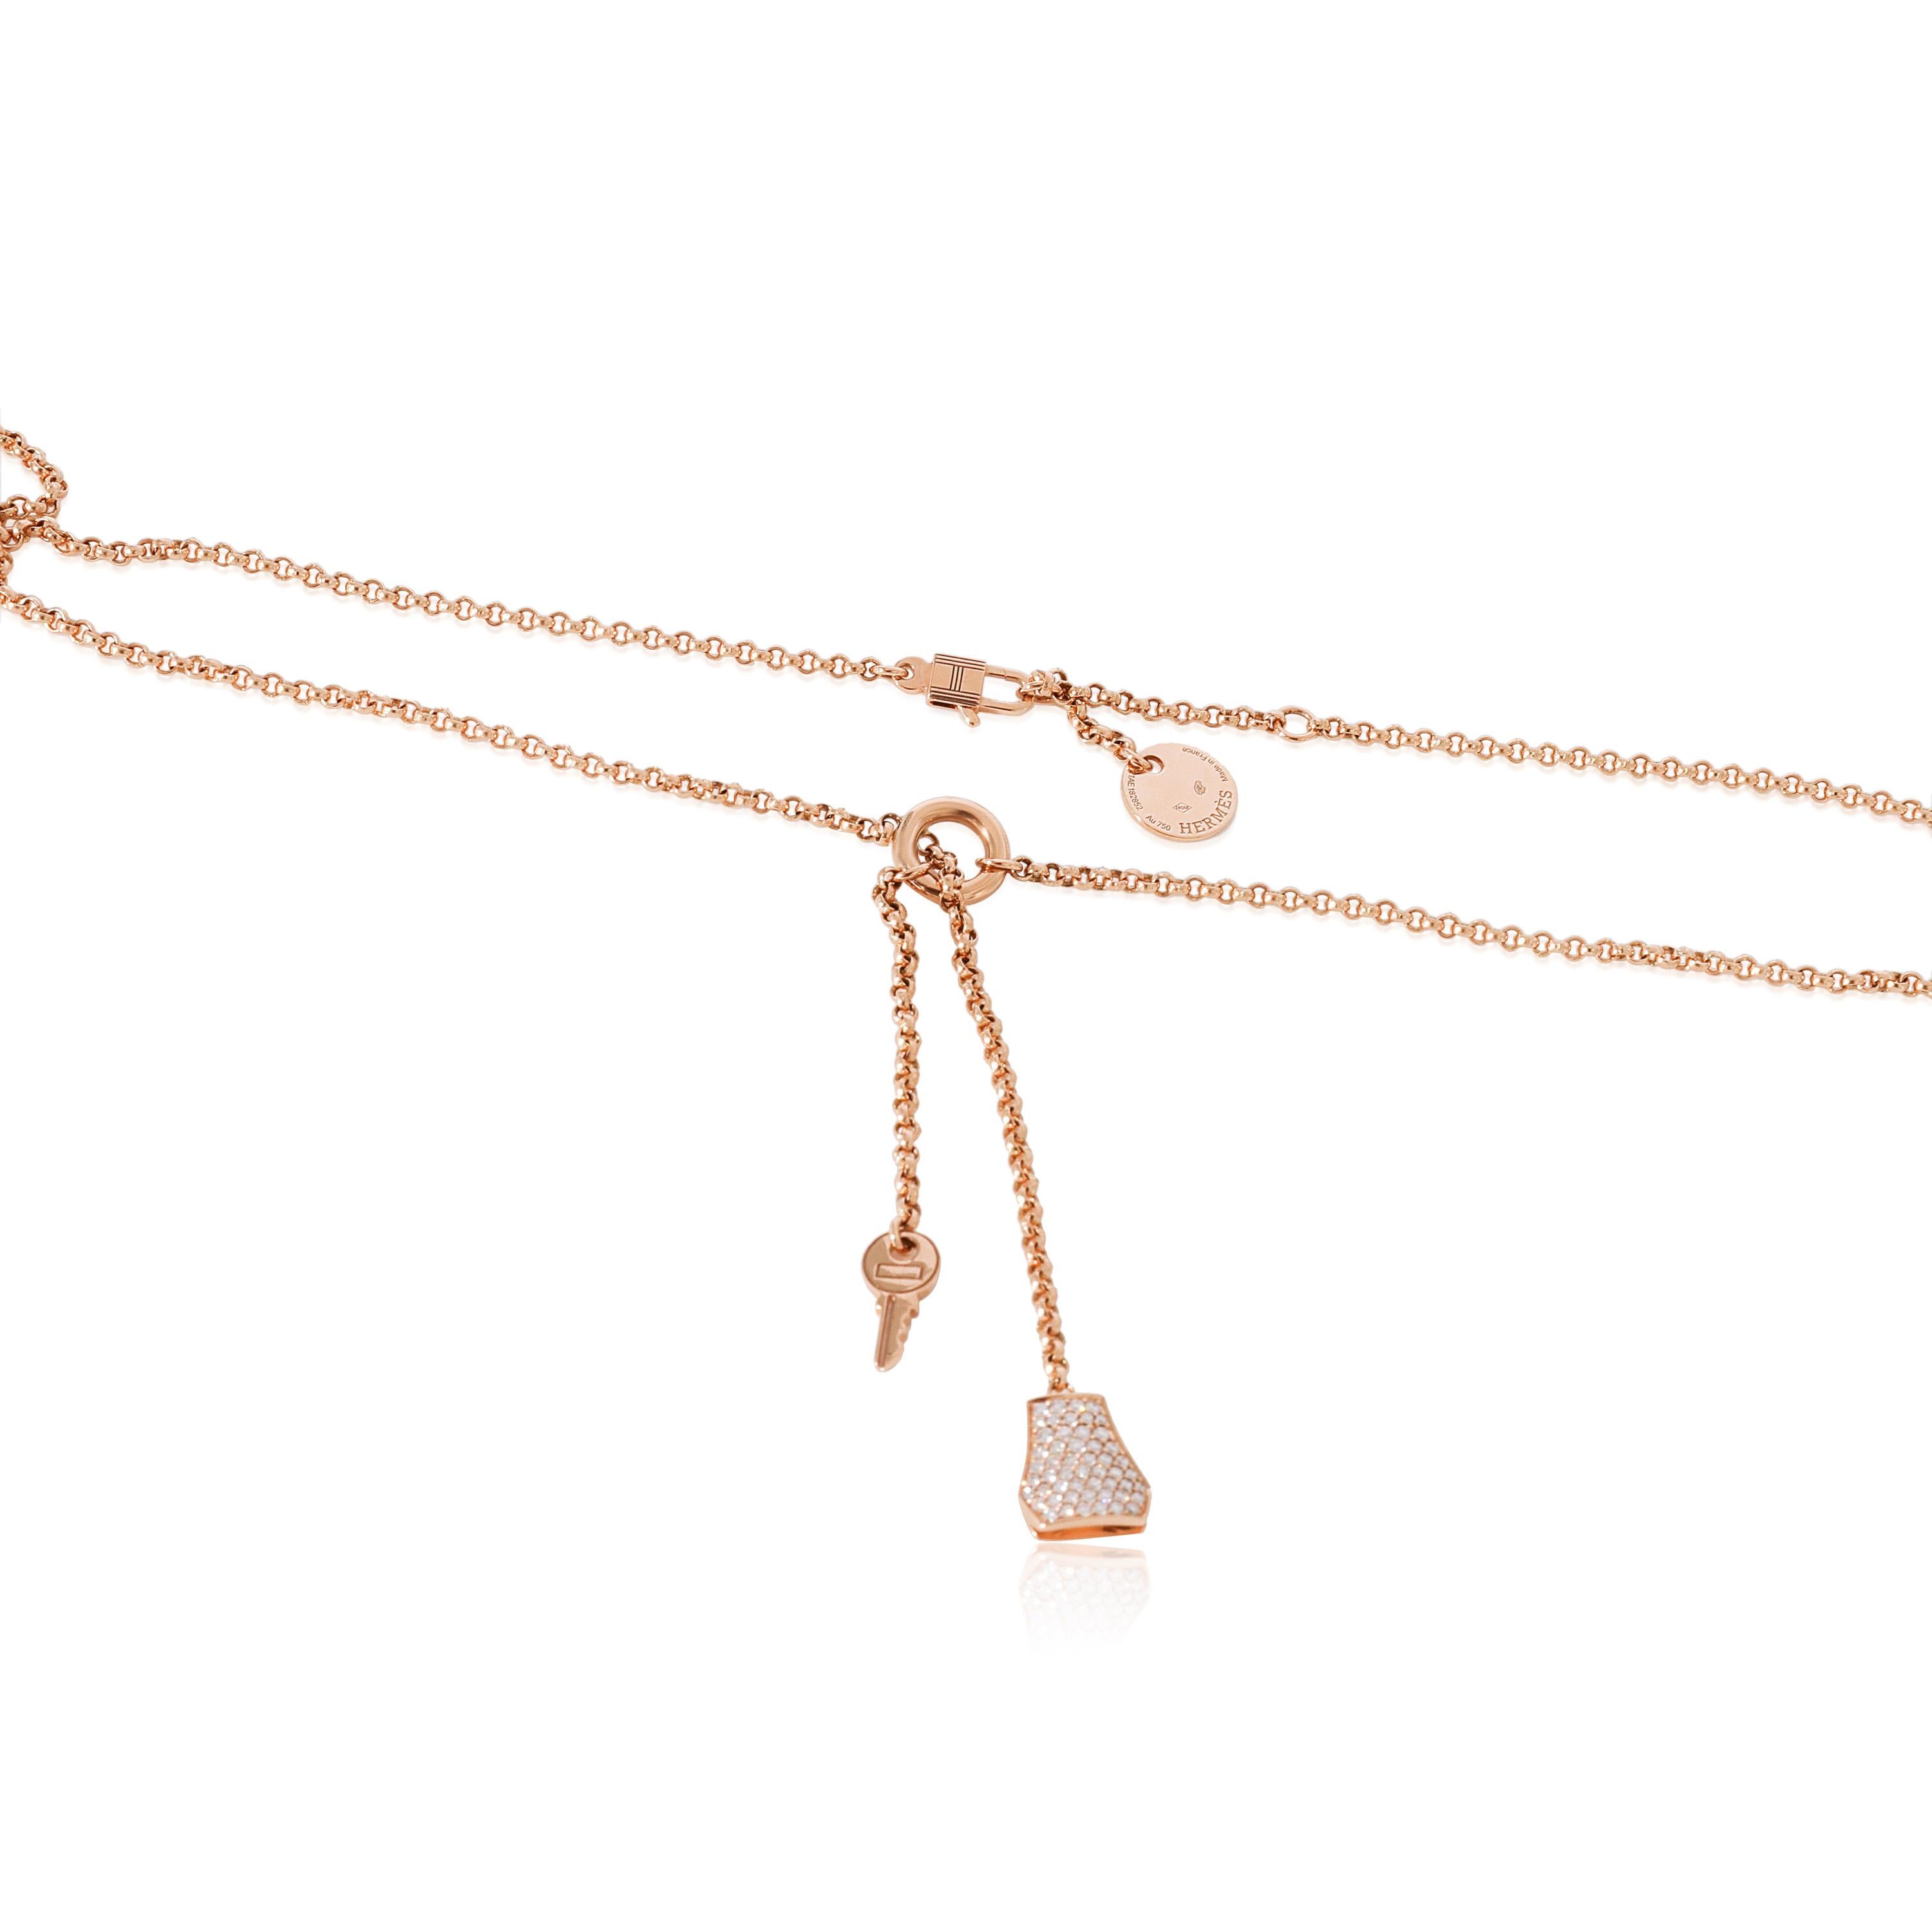 Hermes Kelly Clochette Necklace, Small Model in 18K Rose Gold 0.53 CTW

PRIMARY DETAILS
SKU: 124416
Listing Title: Hermes Kelly Clochette Necklace, Small Model in 18K Rose Gold 0.53 CTW
Condition Description: Retails for 9350 USD. In excellent